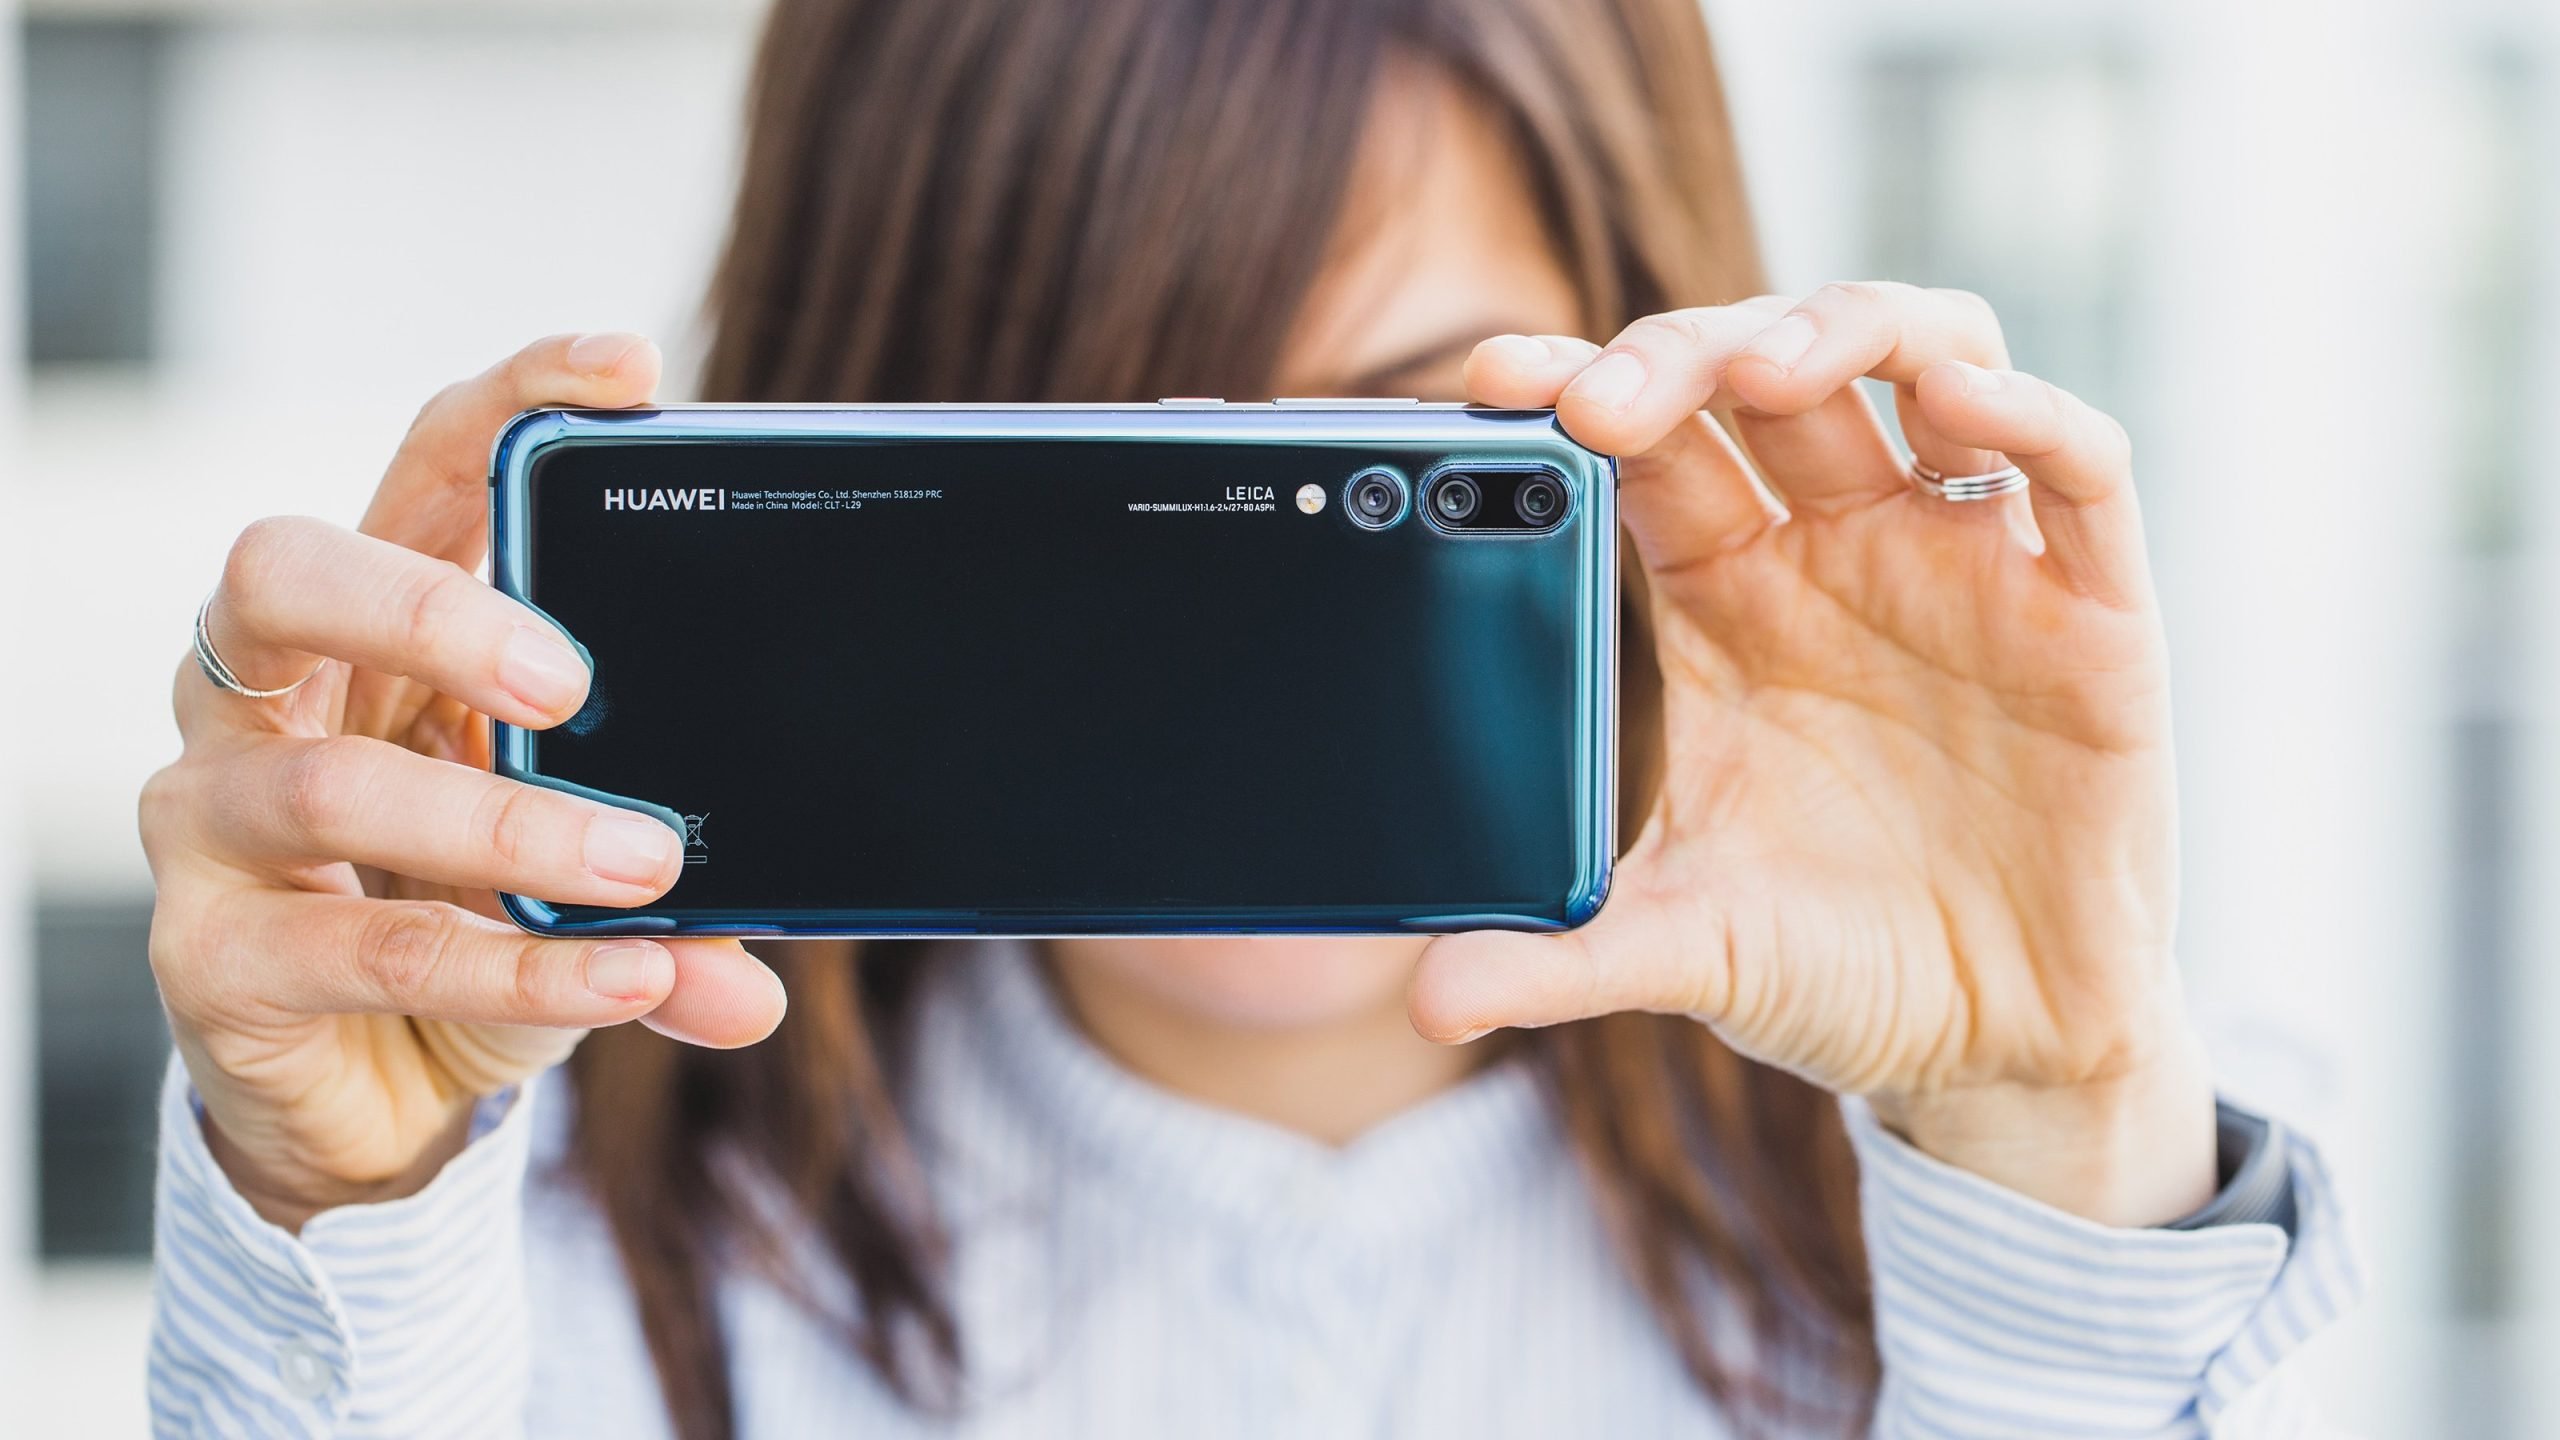 How to take Great Photos With Your Android Phone